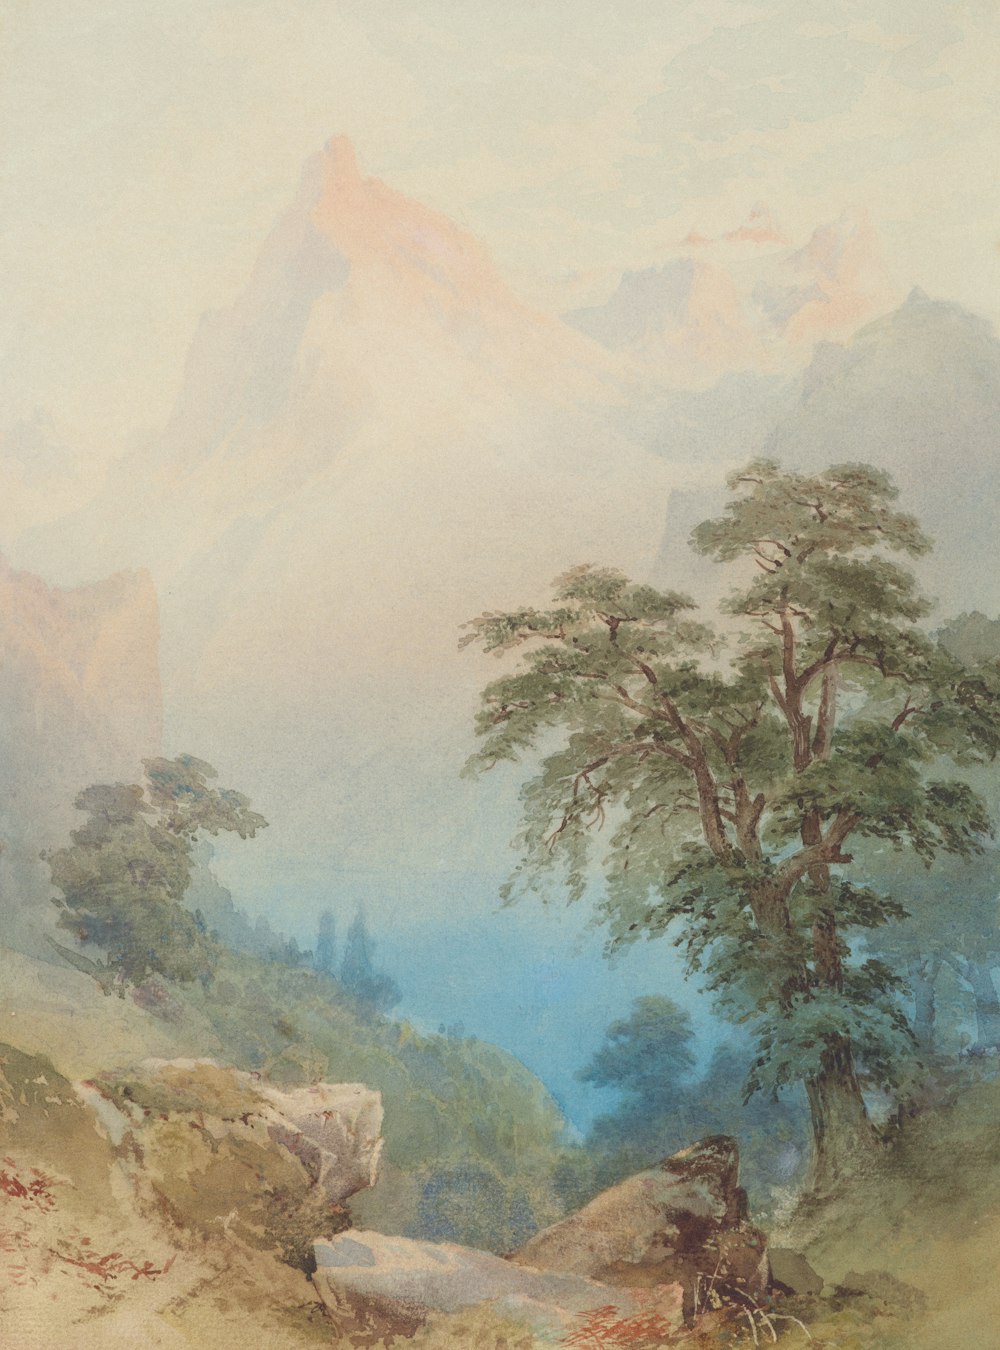 a painting of a mountain scene with a man on a horse